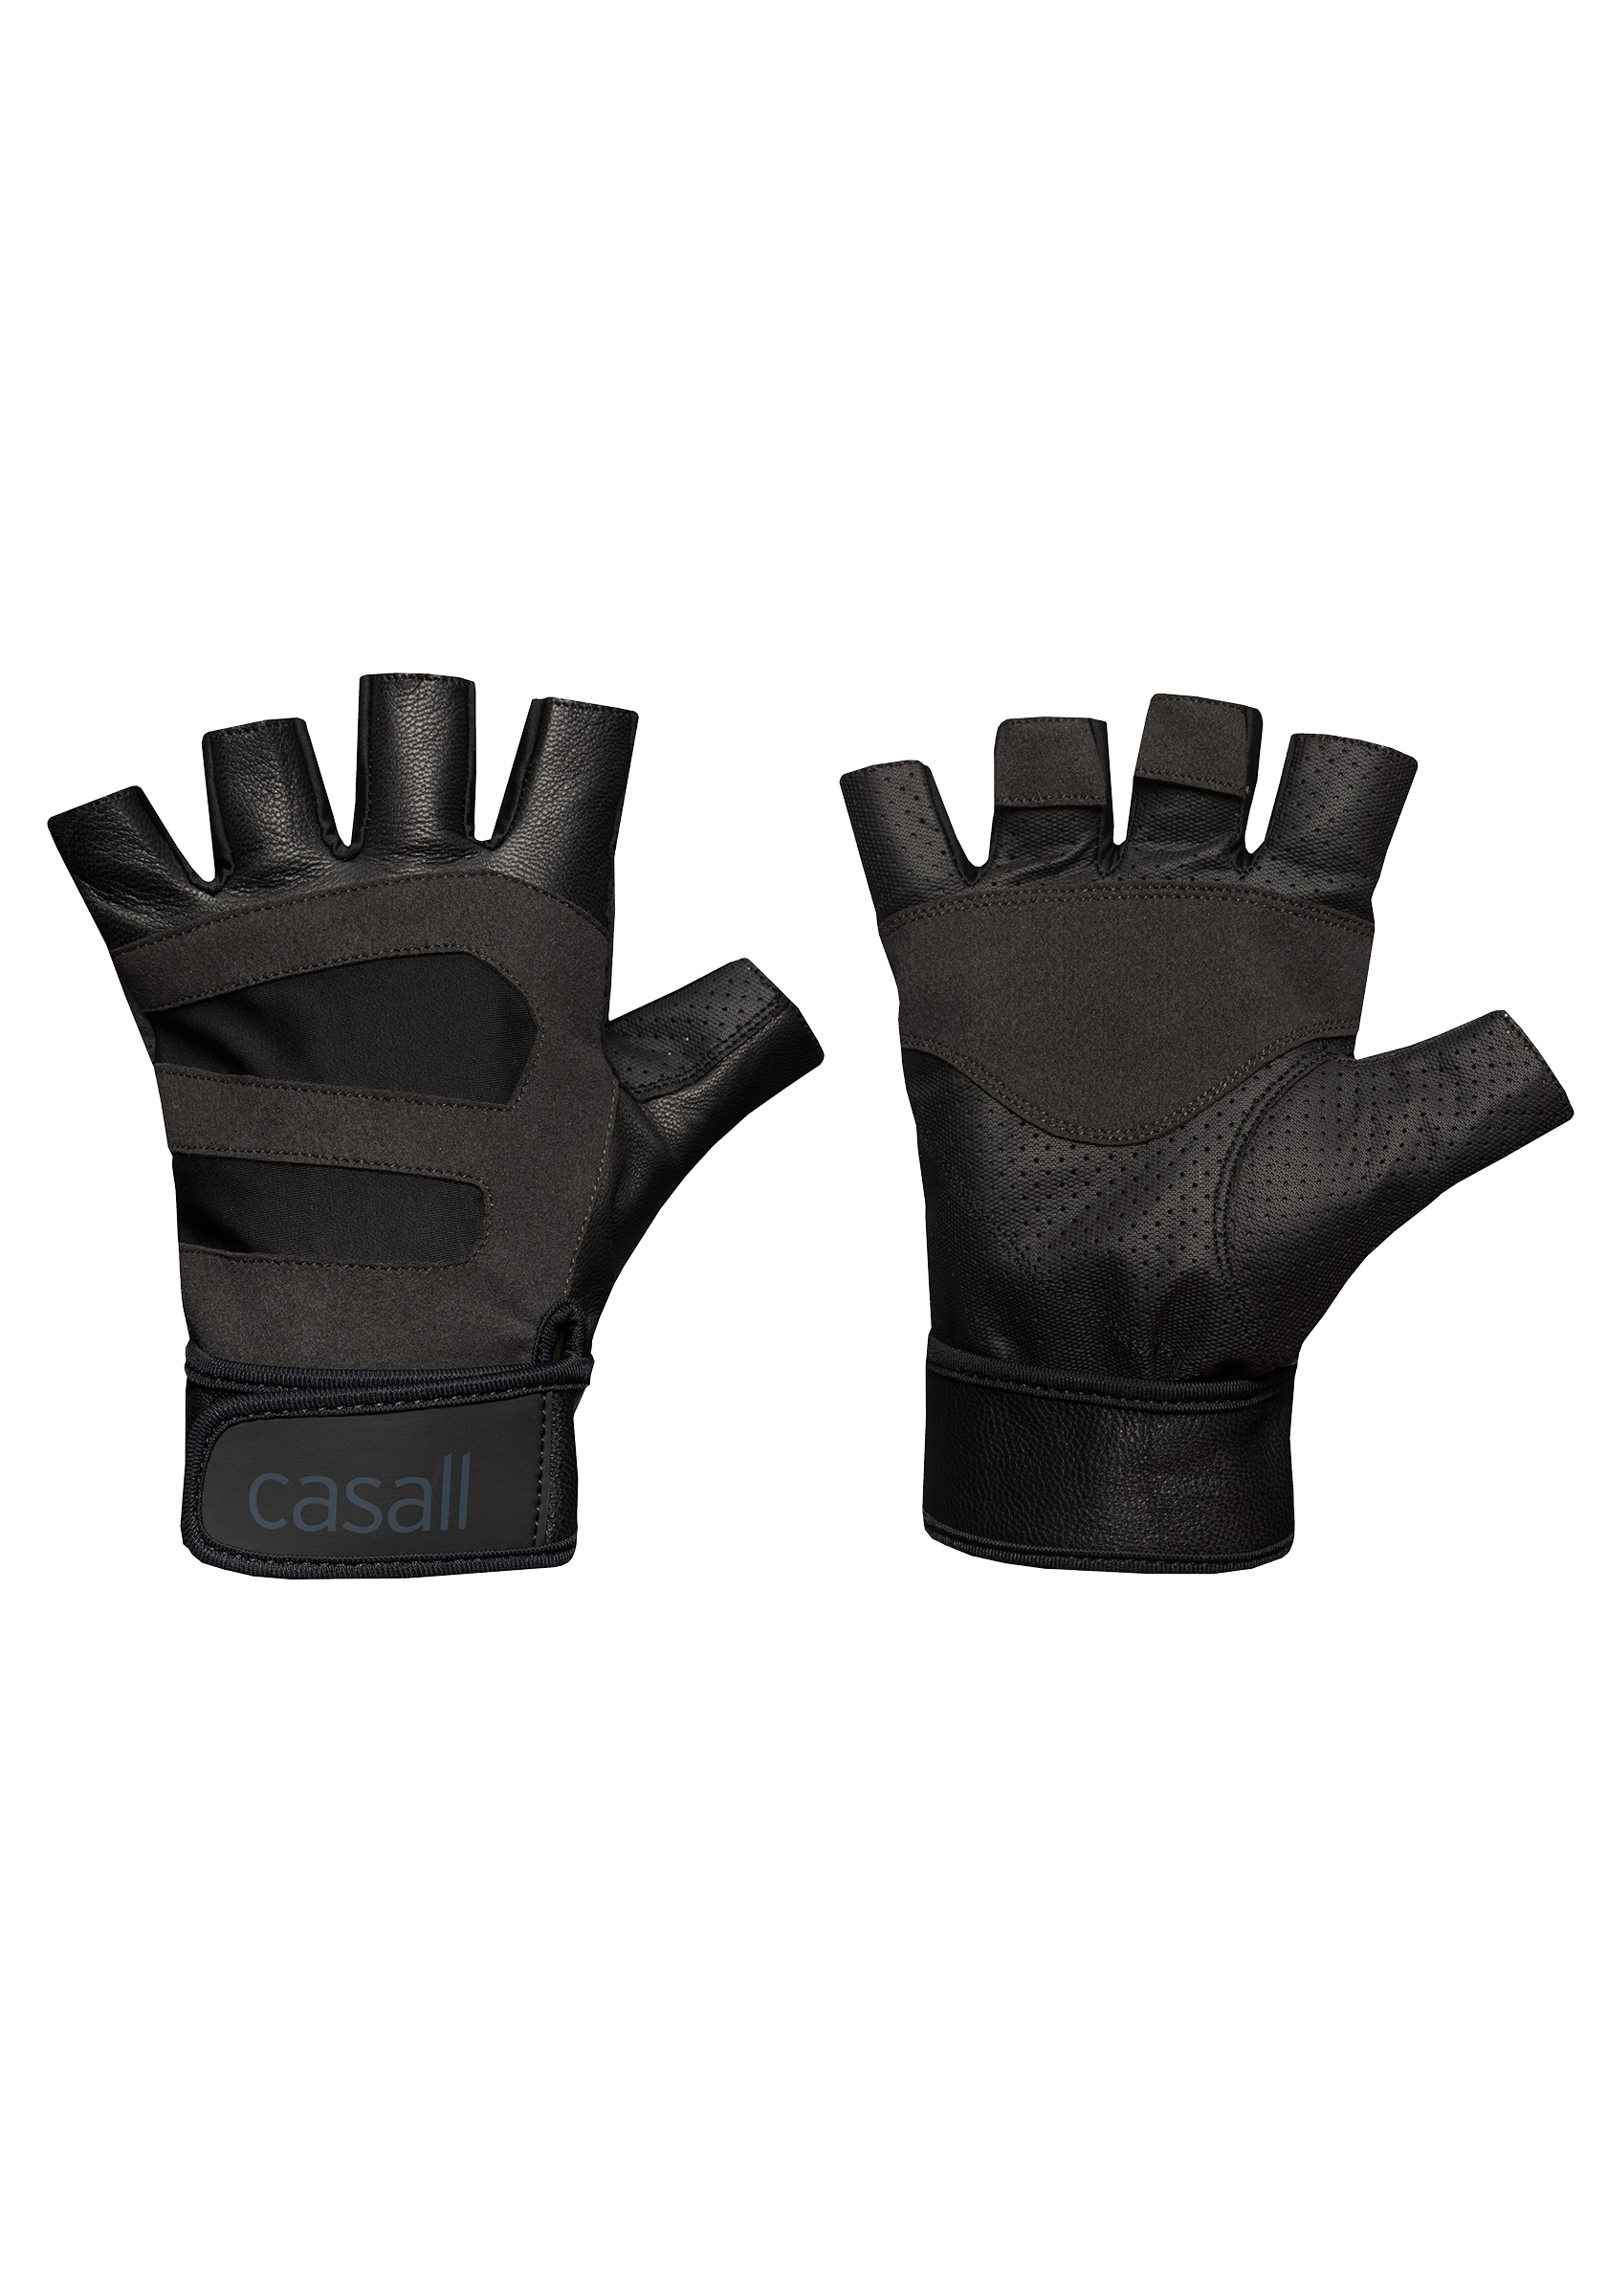 Exercise glove support - Black